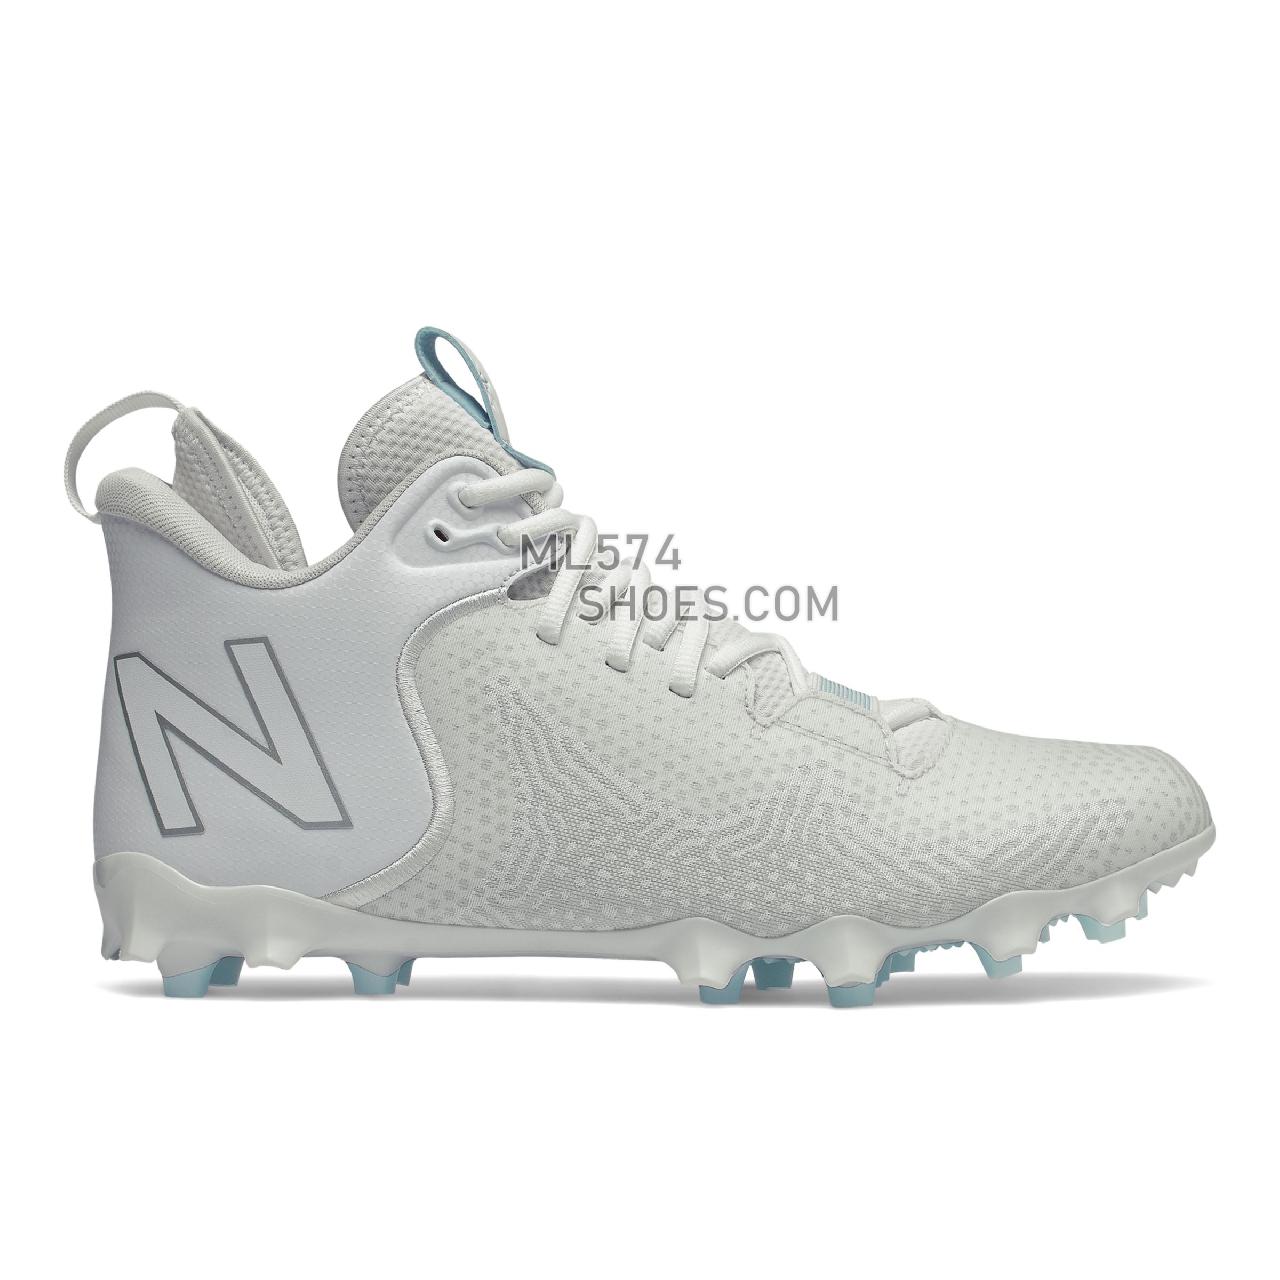 New Balance FreezeLX v3 - Men's Turf And Lacrosse Cleats - White with Grey - FREEZWT3